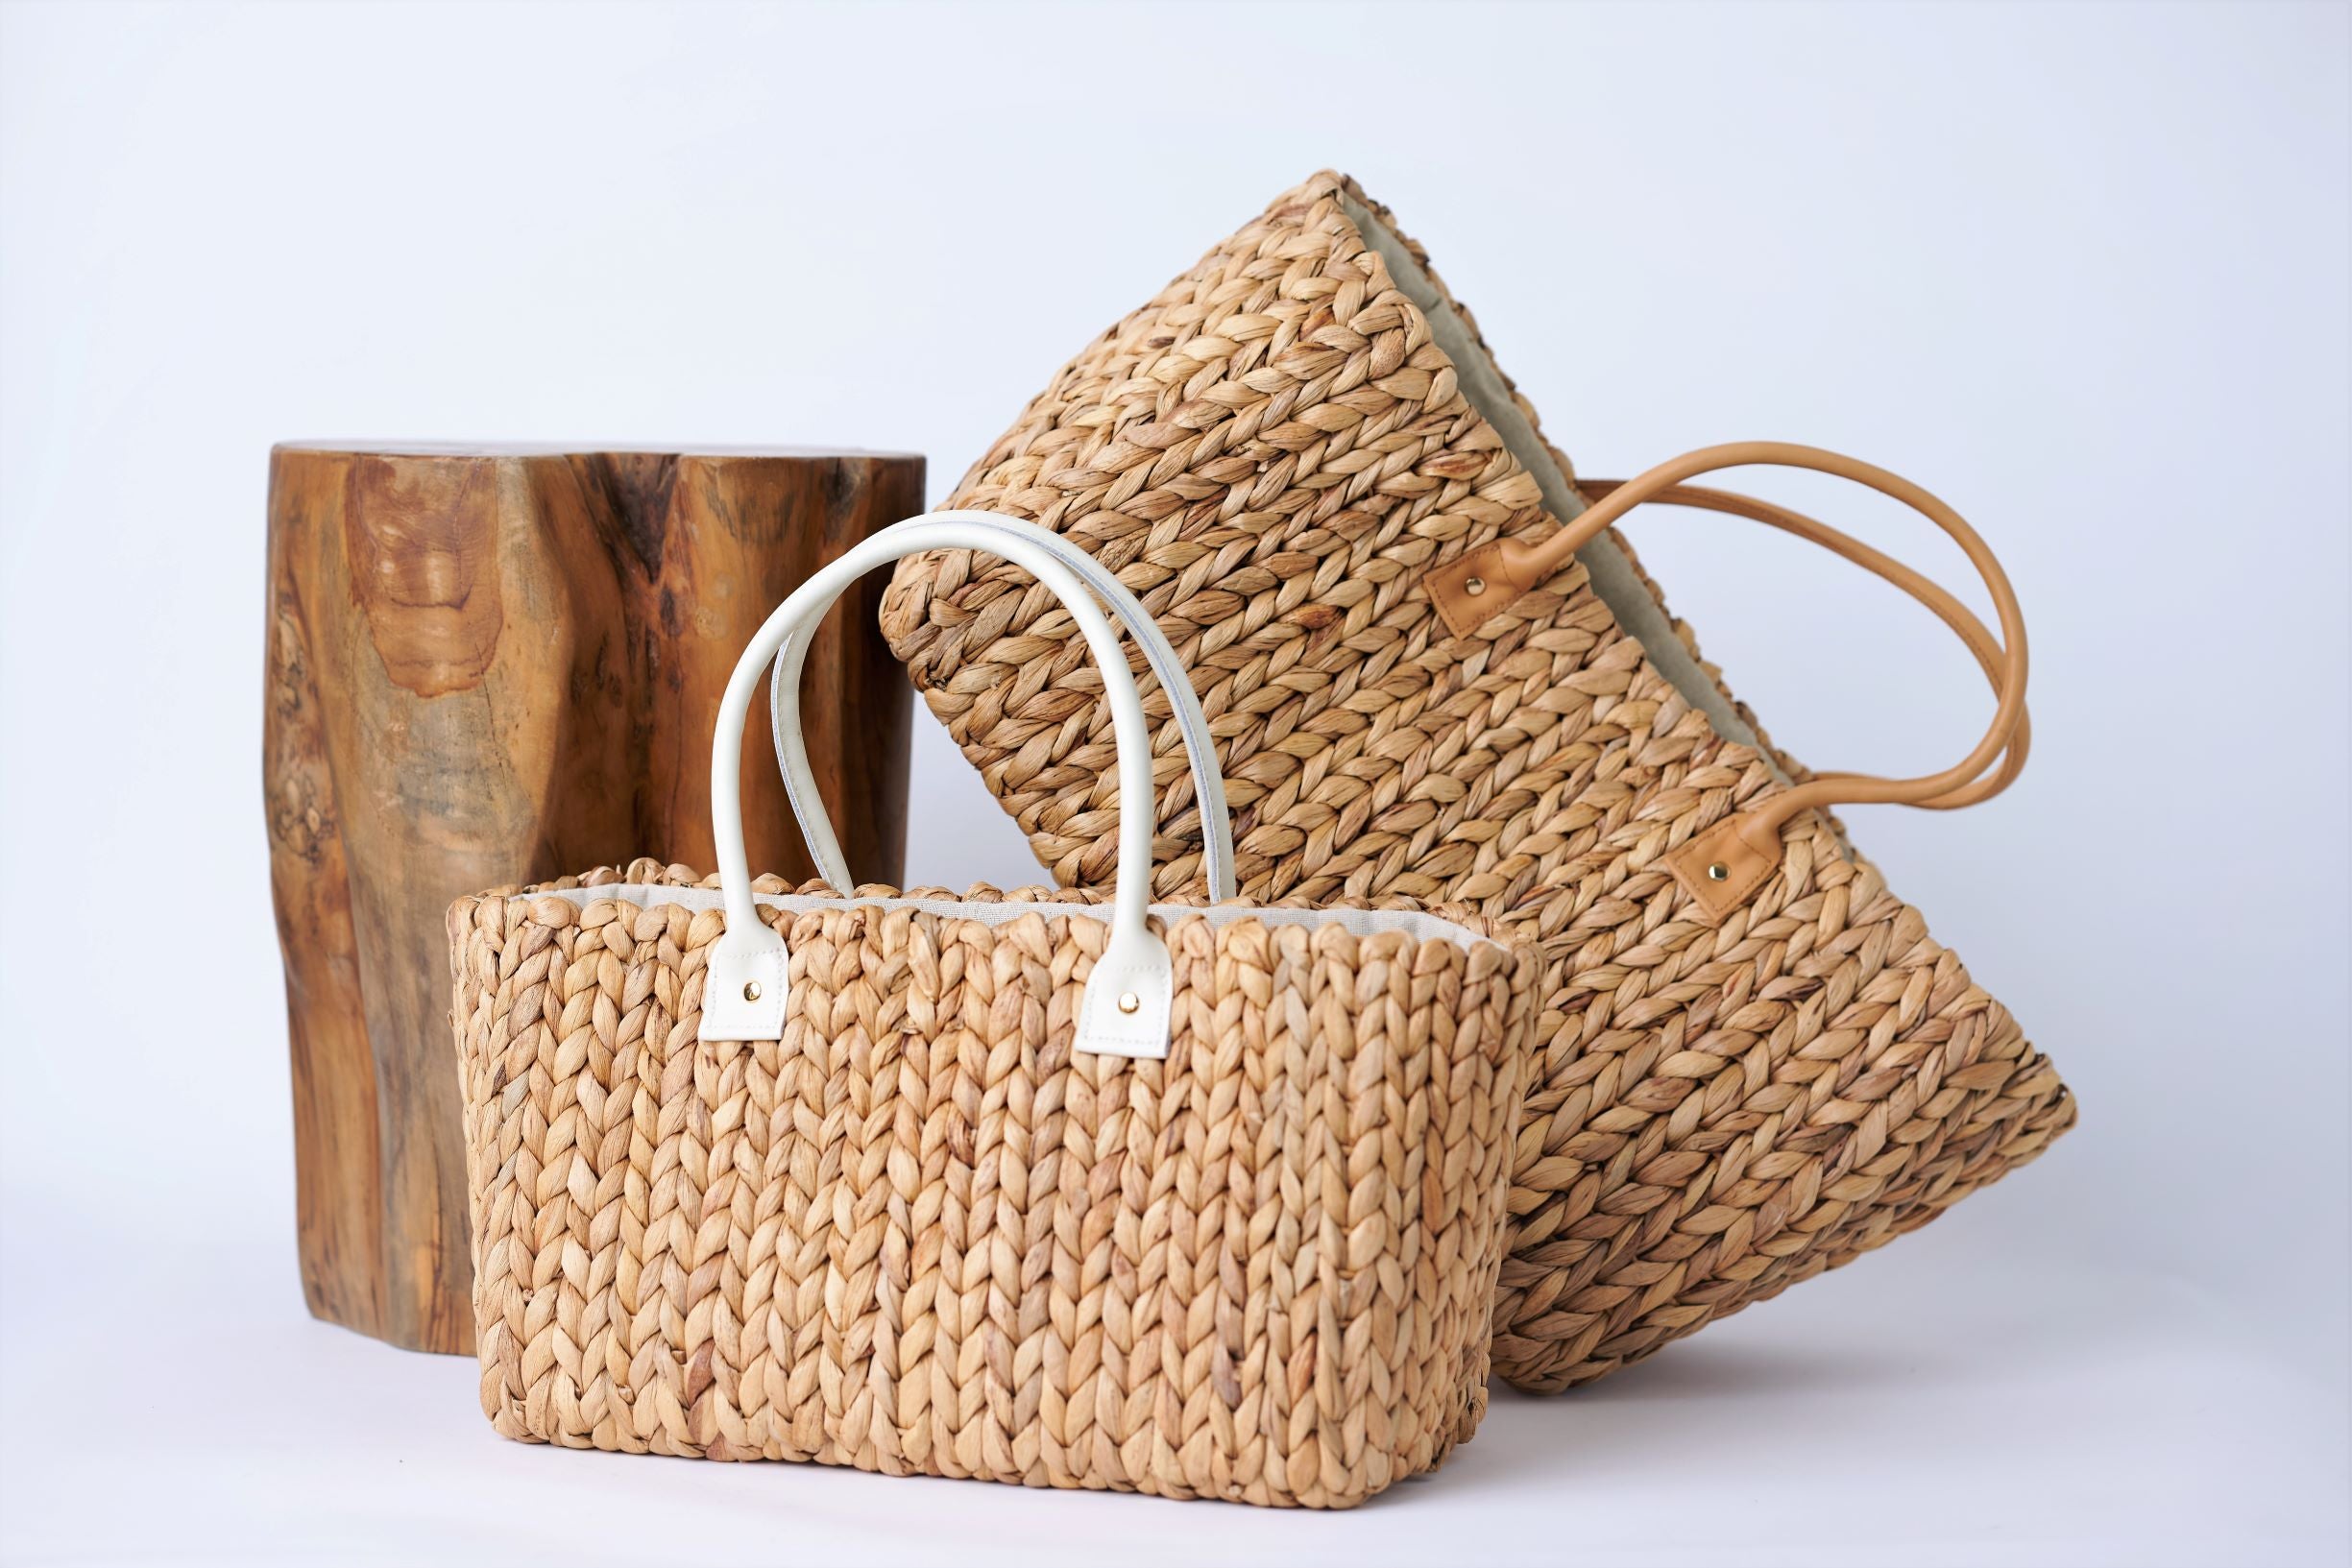 Summer Wicker And Canvas Tote Beach Bags, Handmade Bamboo Woven Basket Bags  With Embroidery Strap Purse From Lvvl_bag, $76.99 | DHgate.Com